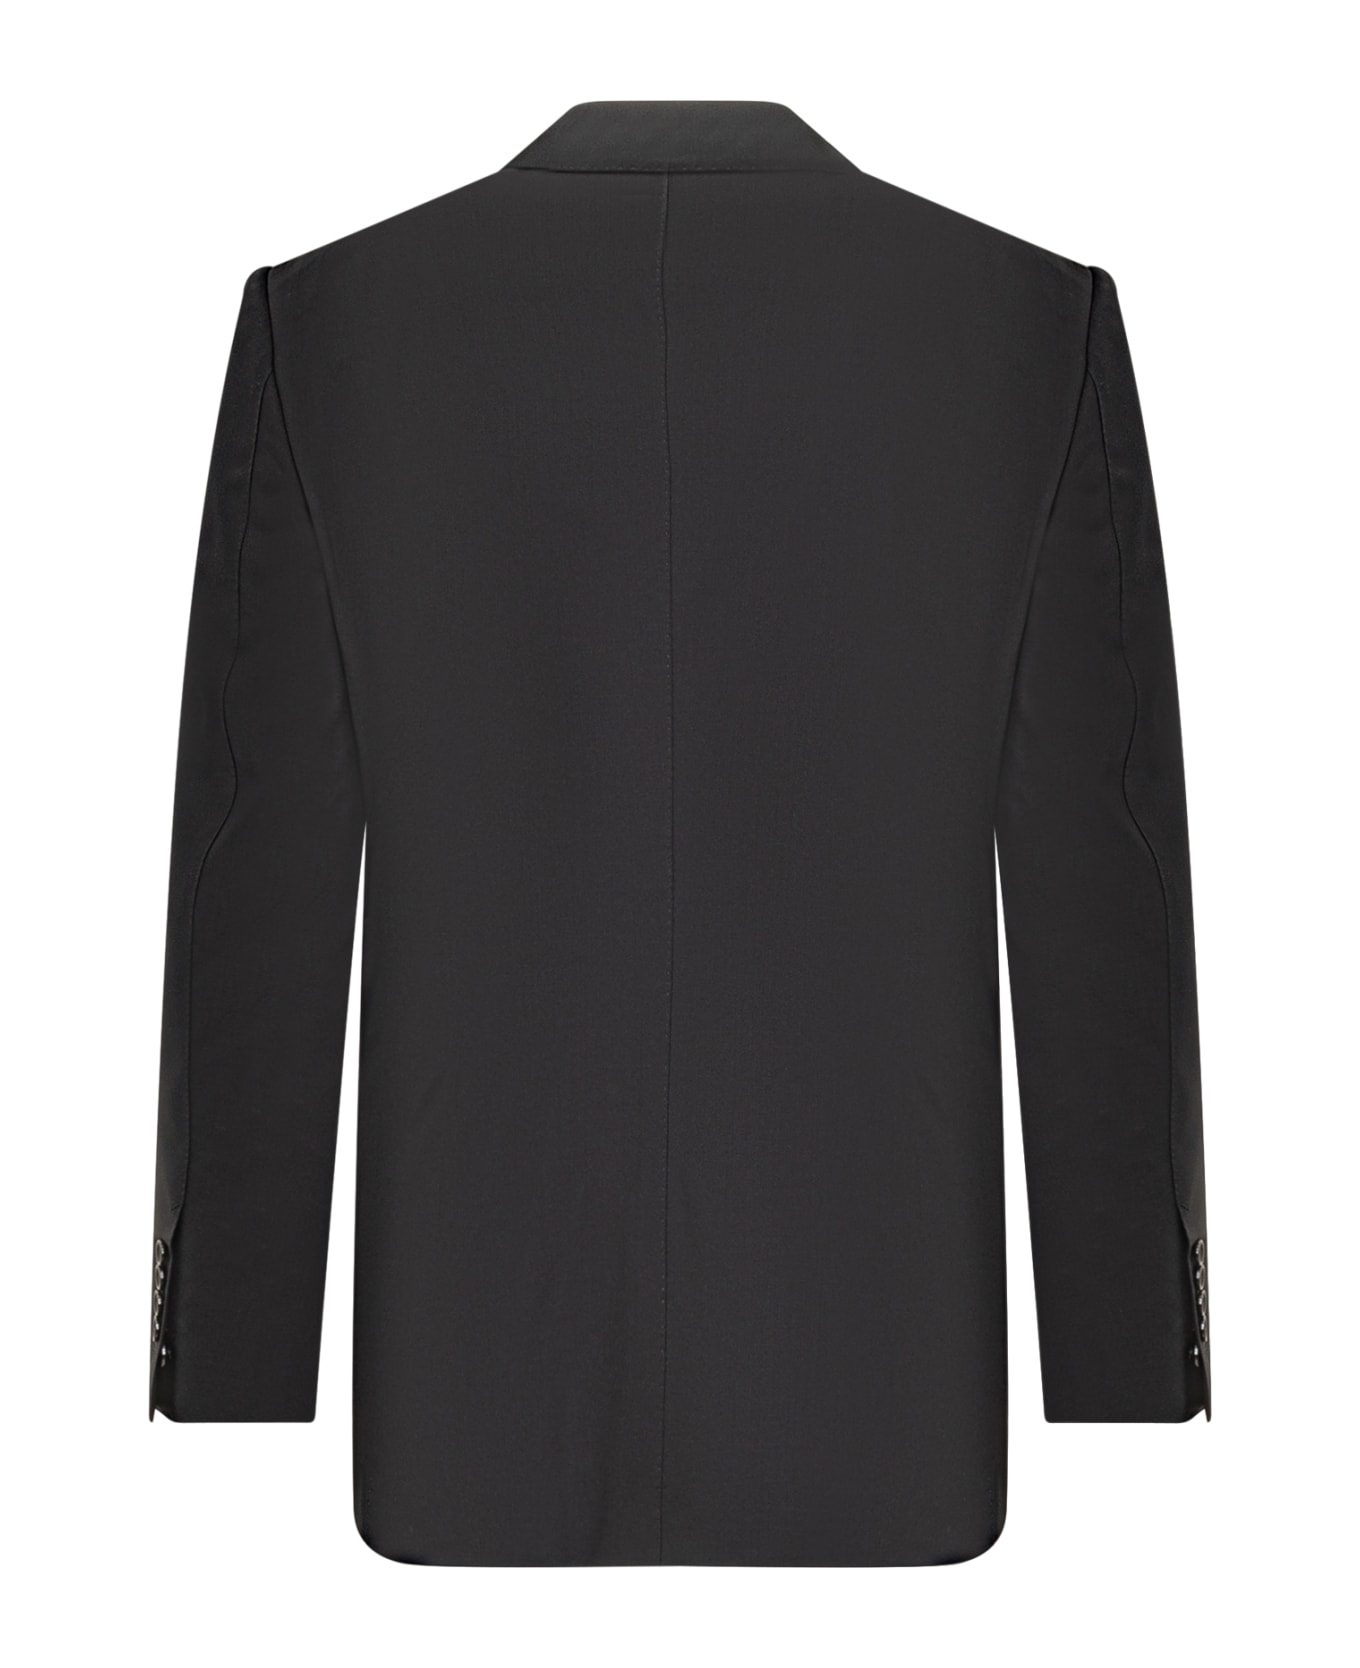 Tom Ford Two Piece Suit - INK